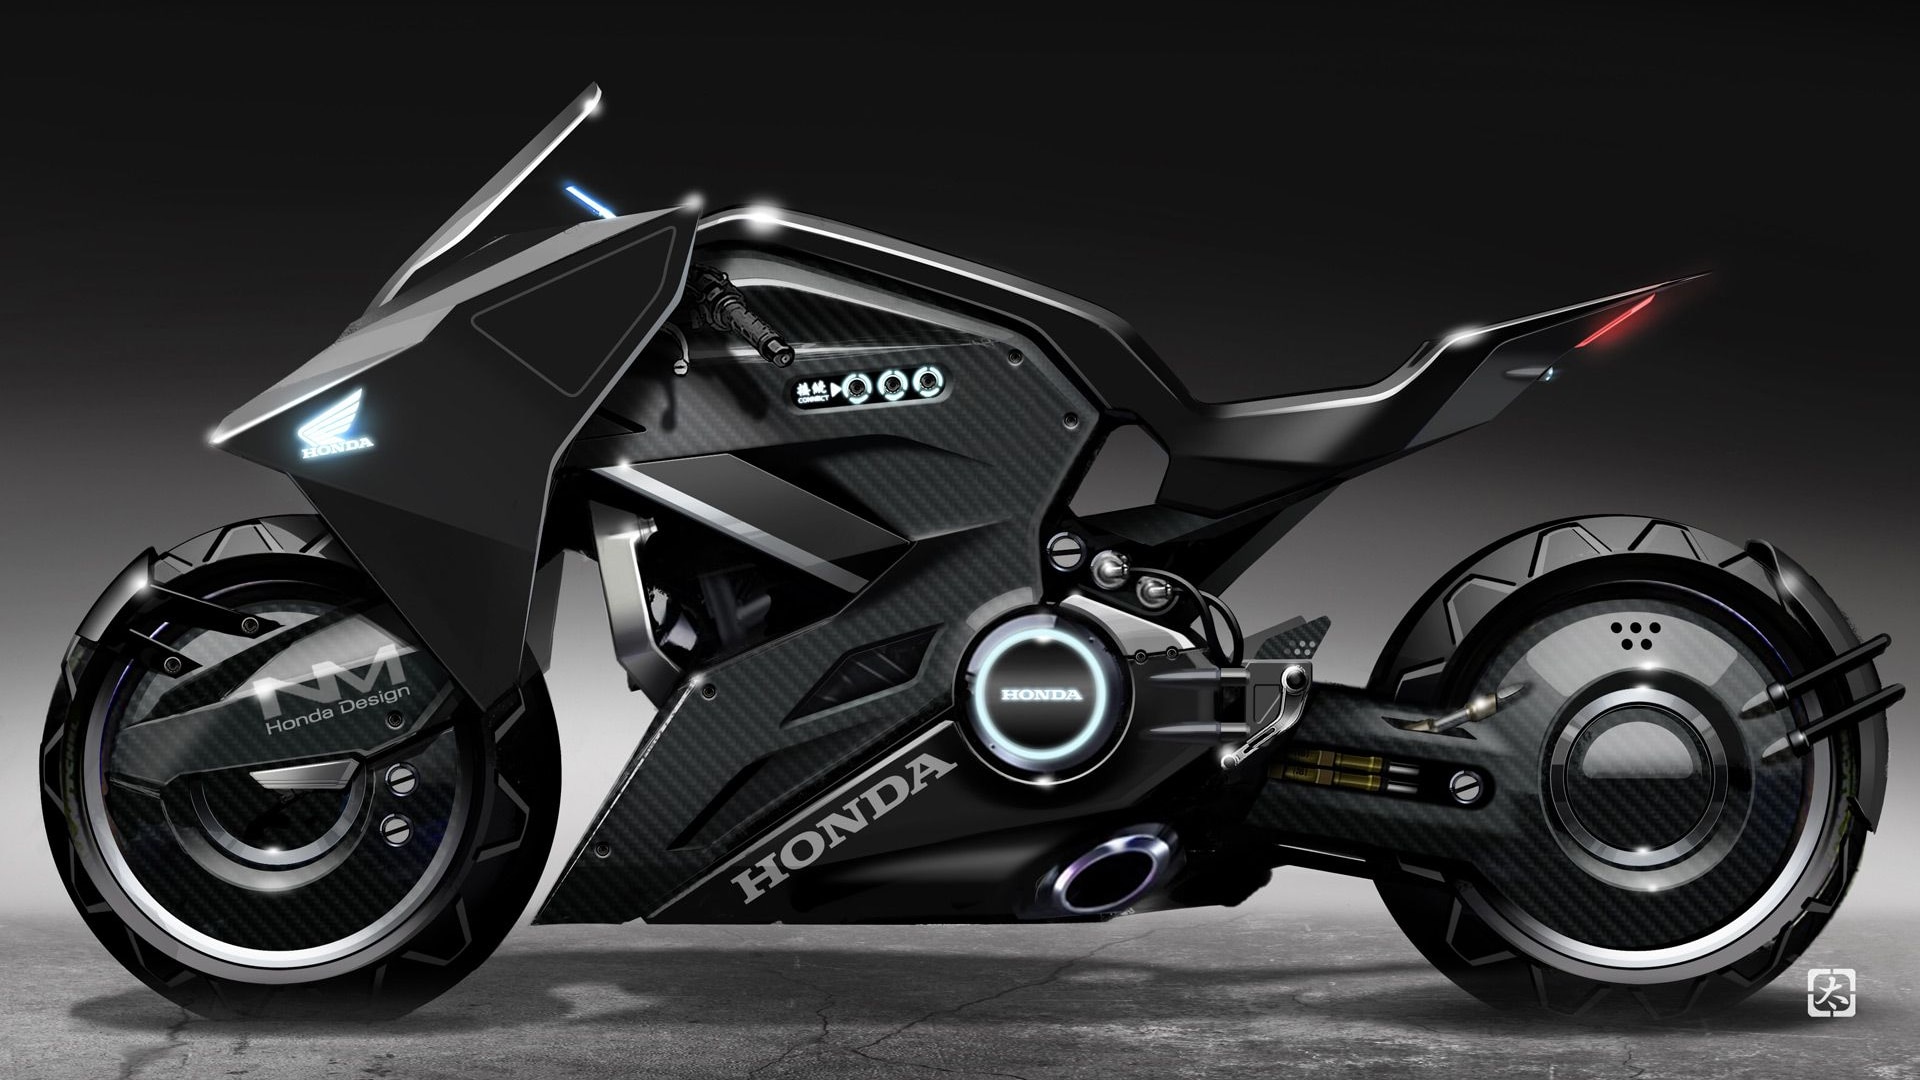 Honda NM4-based concept motorcycle from ‘Ghost in the Shell’